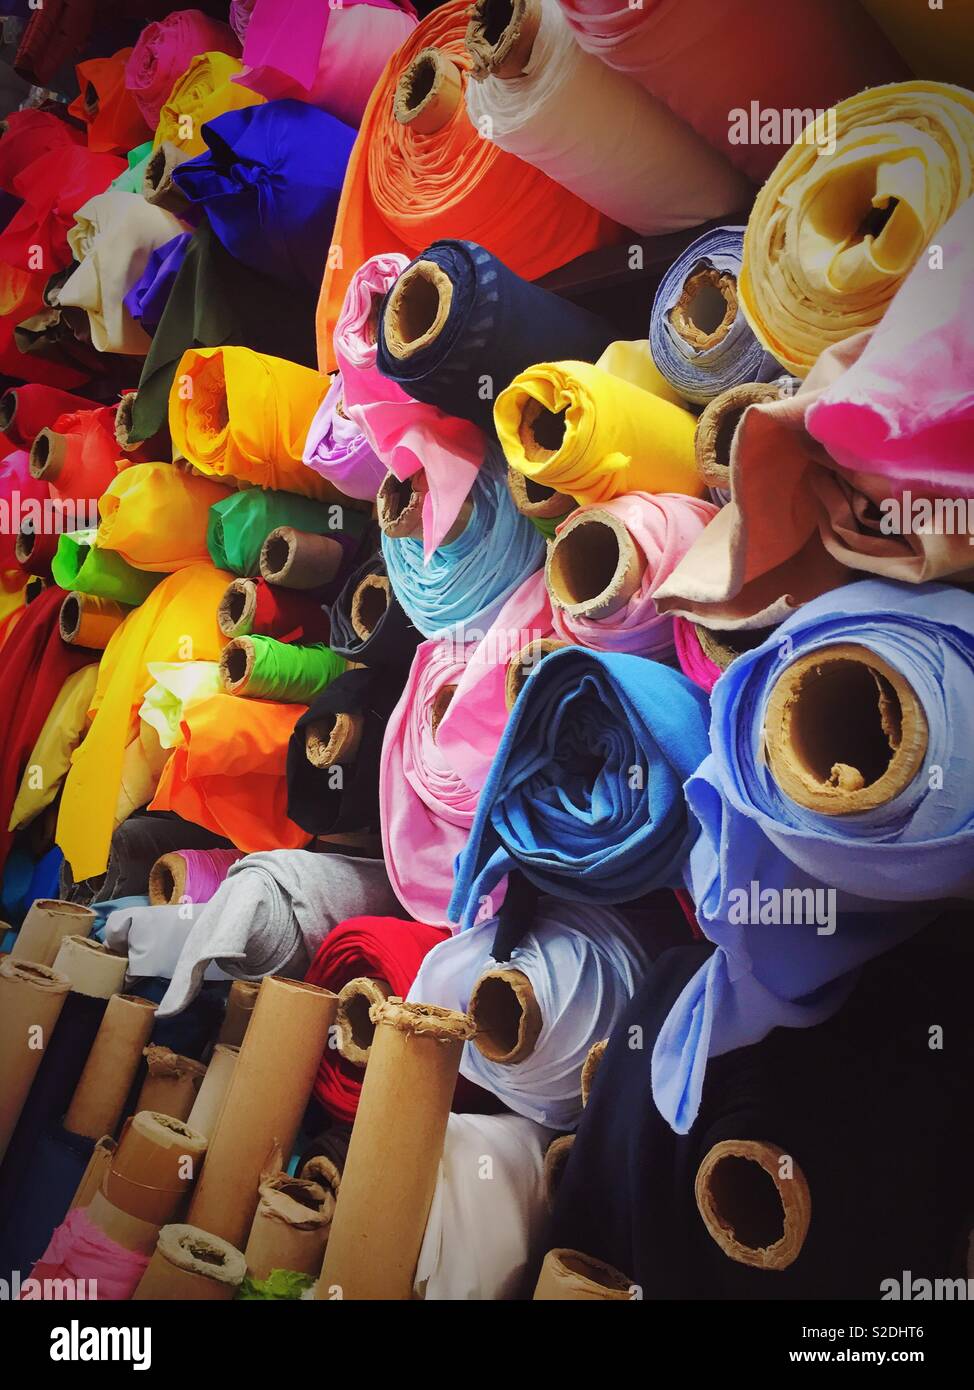 https://c8.alamy.com/comp/S2DHT6/colorful-rolls-of-fabric-and-a-retail-fabric-store-in-the-garment-district-new-york-city-usa-S2DHT6.jpg